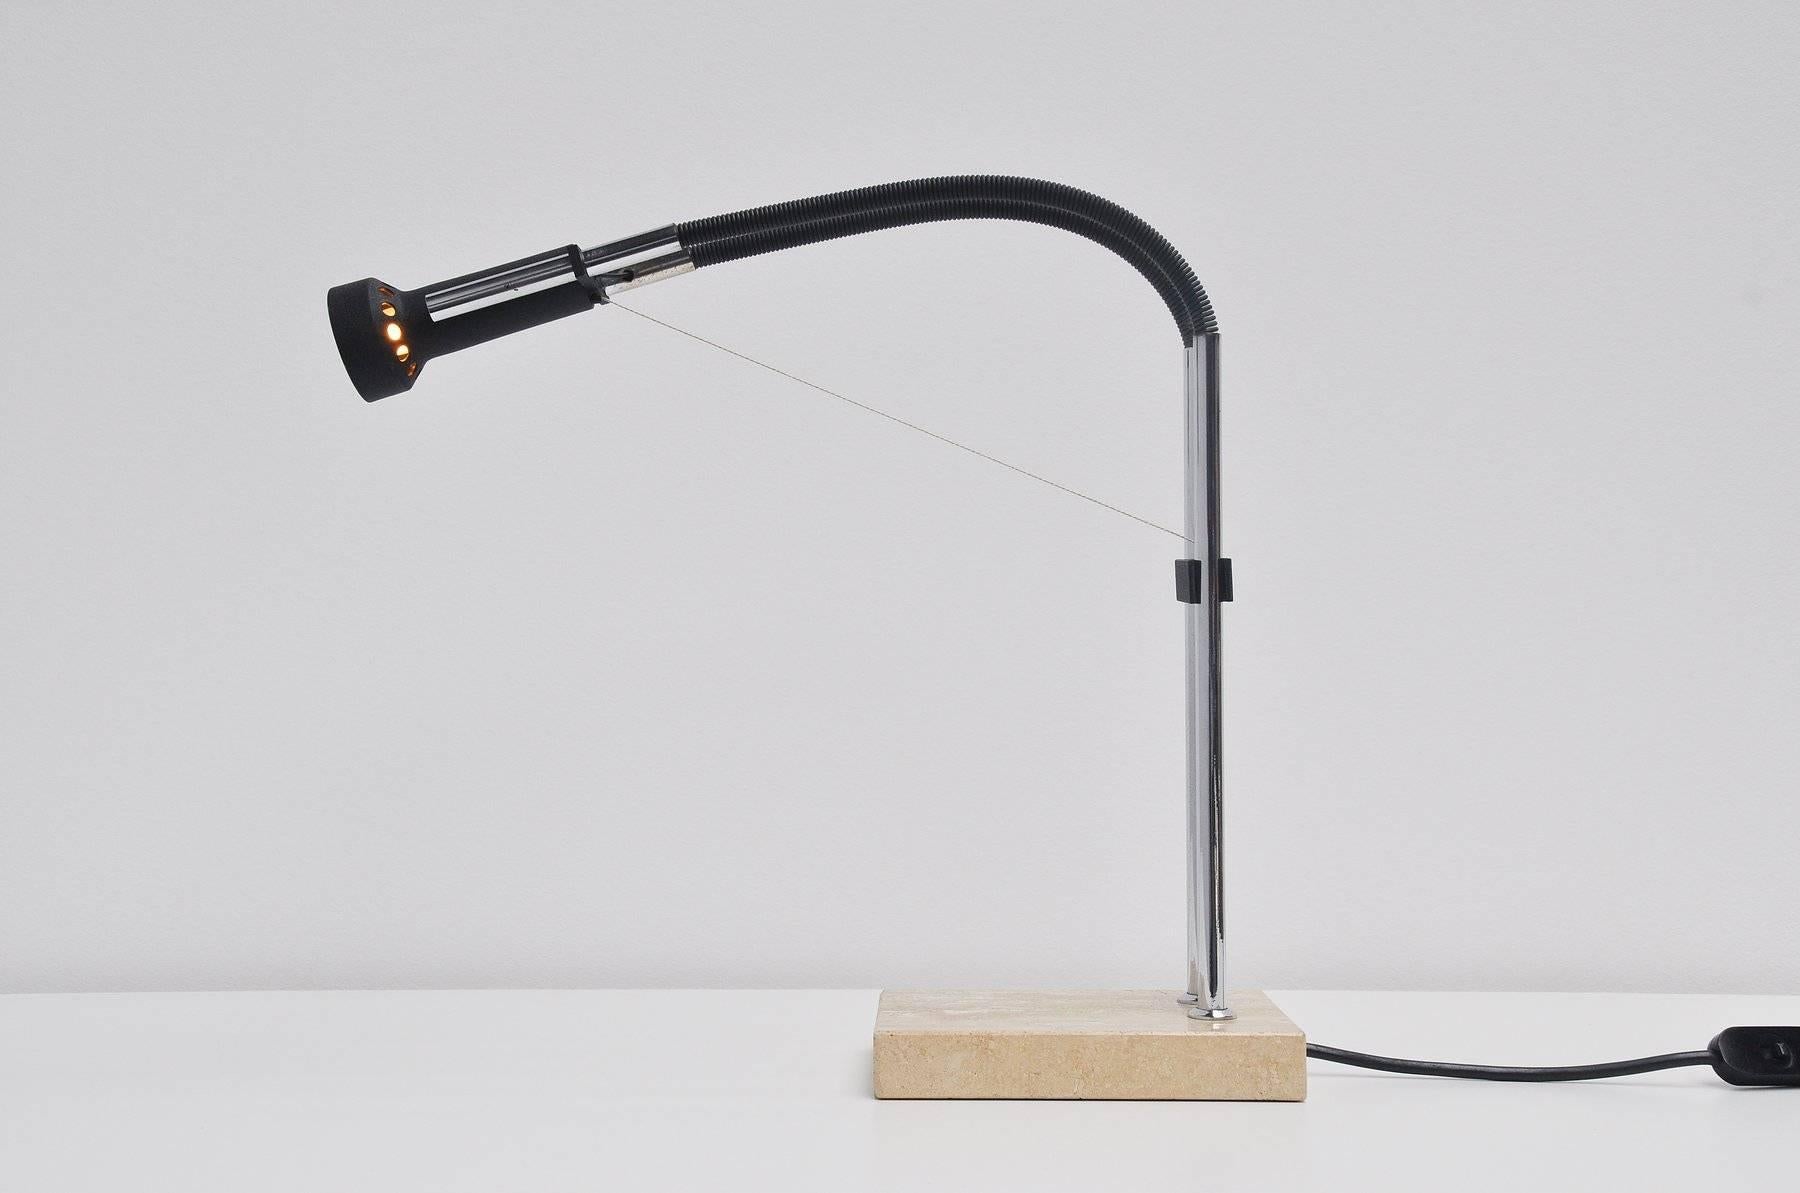 Articulating table lamp designed by Angelo Lelli for Arredoluce, Italy 1960. This is for a very small table lamp on a travertine base, the lamp adjusts height through a counter-weight and wire system attached to two chrome supports on the base. Very